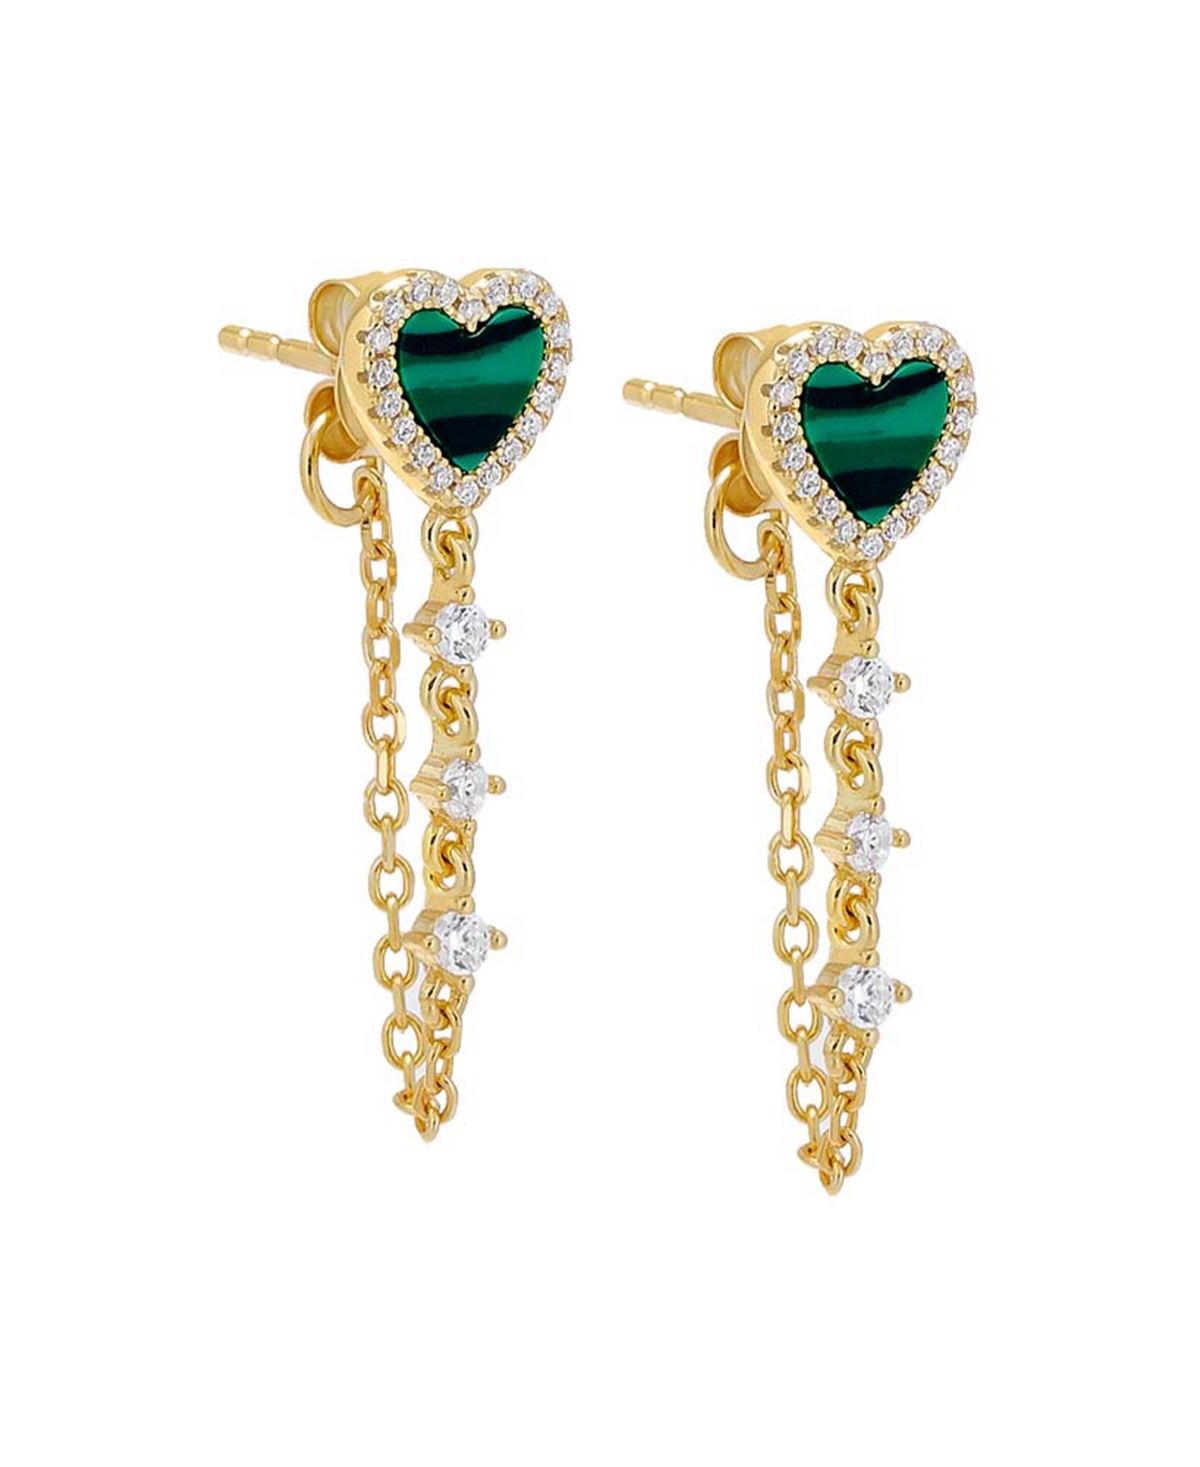 14k Gold-Plated Sterling Silver Pave & Mother-of-Pearl Heart Front-to-Back Earrings - Green